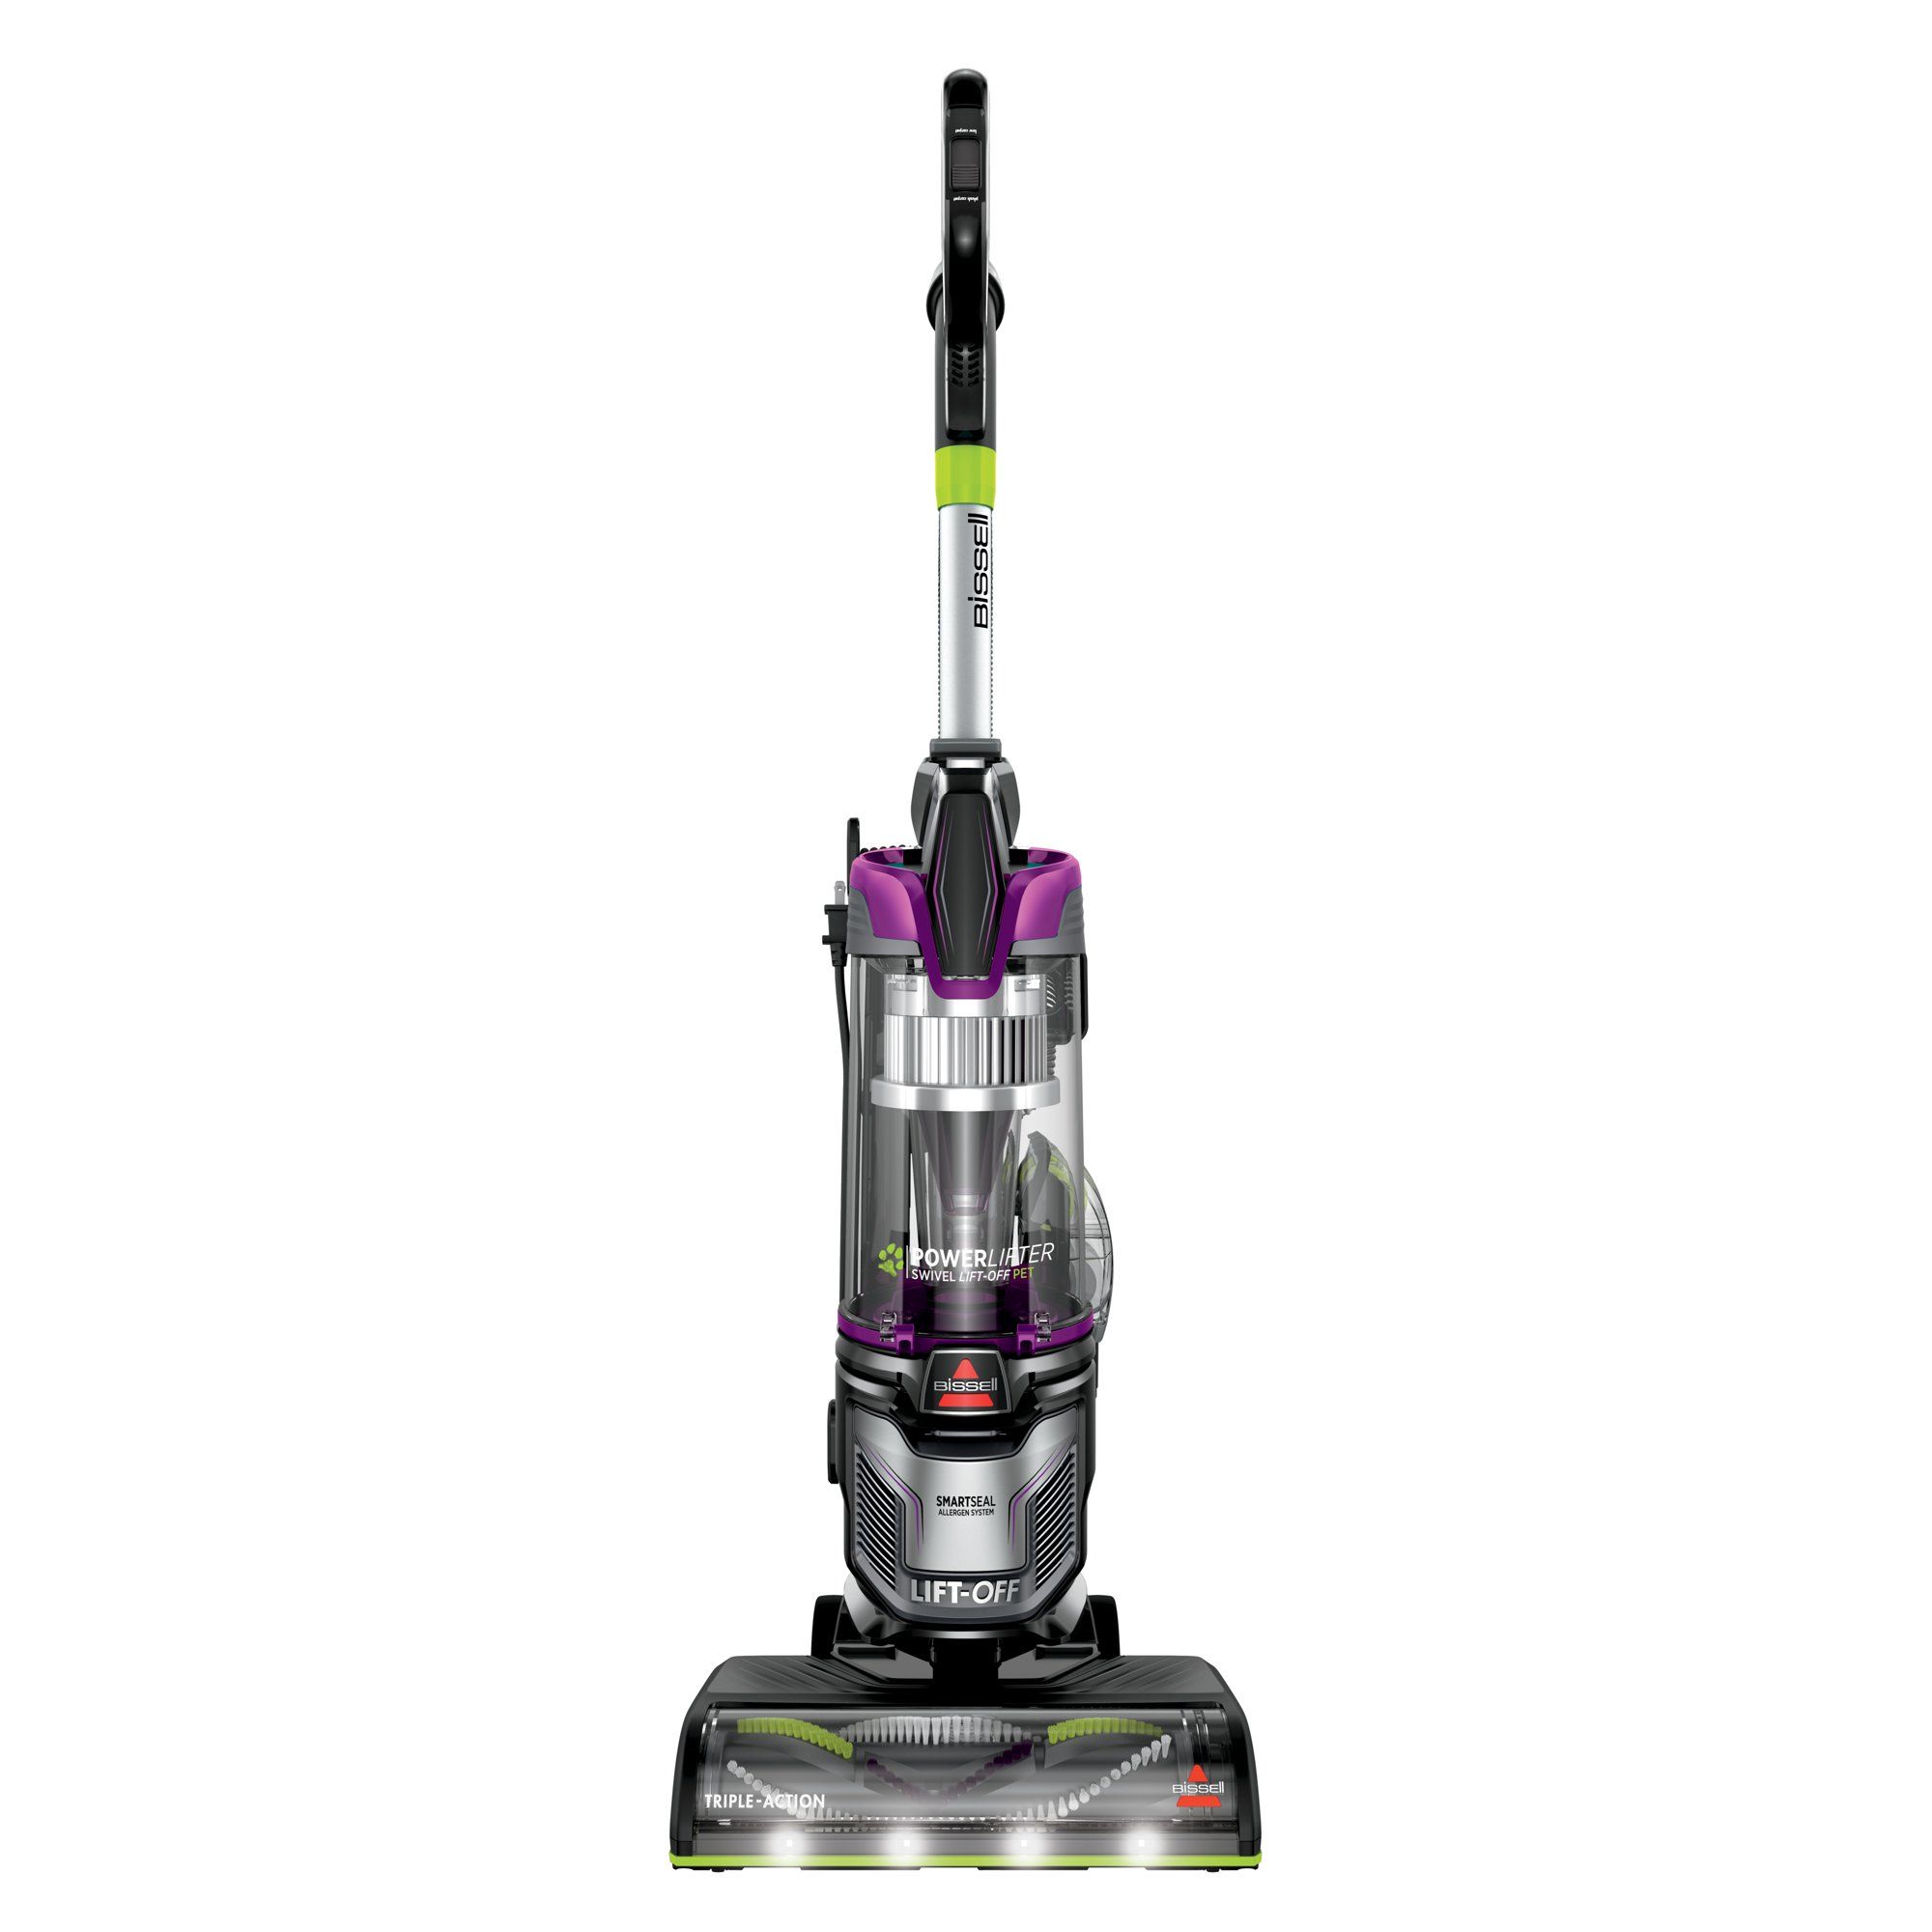 Bissell Powerlifter Pet Lift-off Upright Vacuum Cleaner - 2920 | Walmart (US)